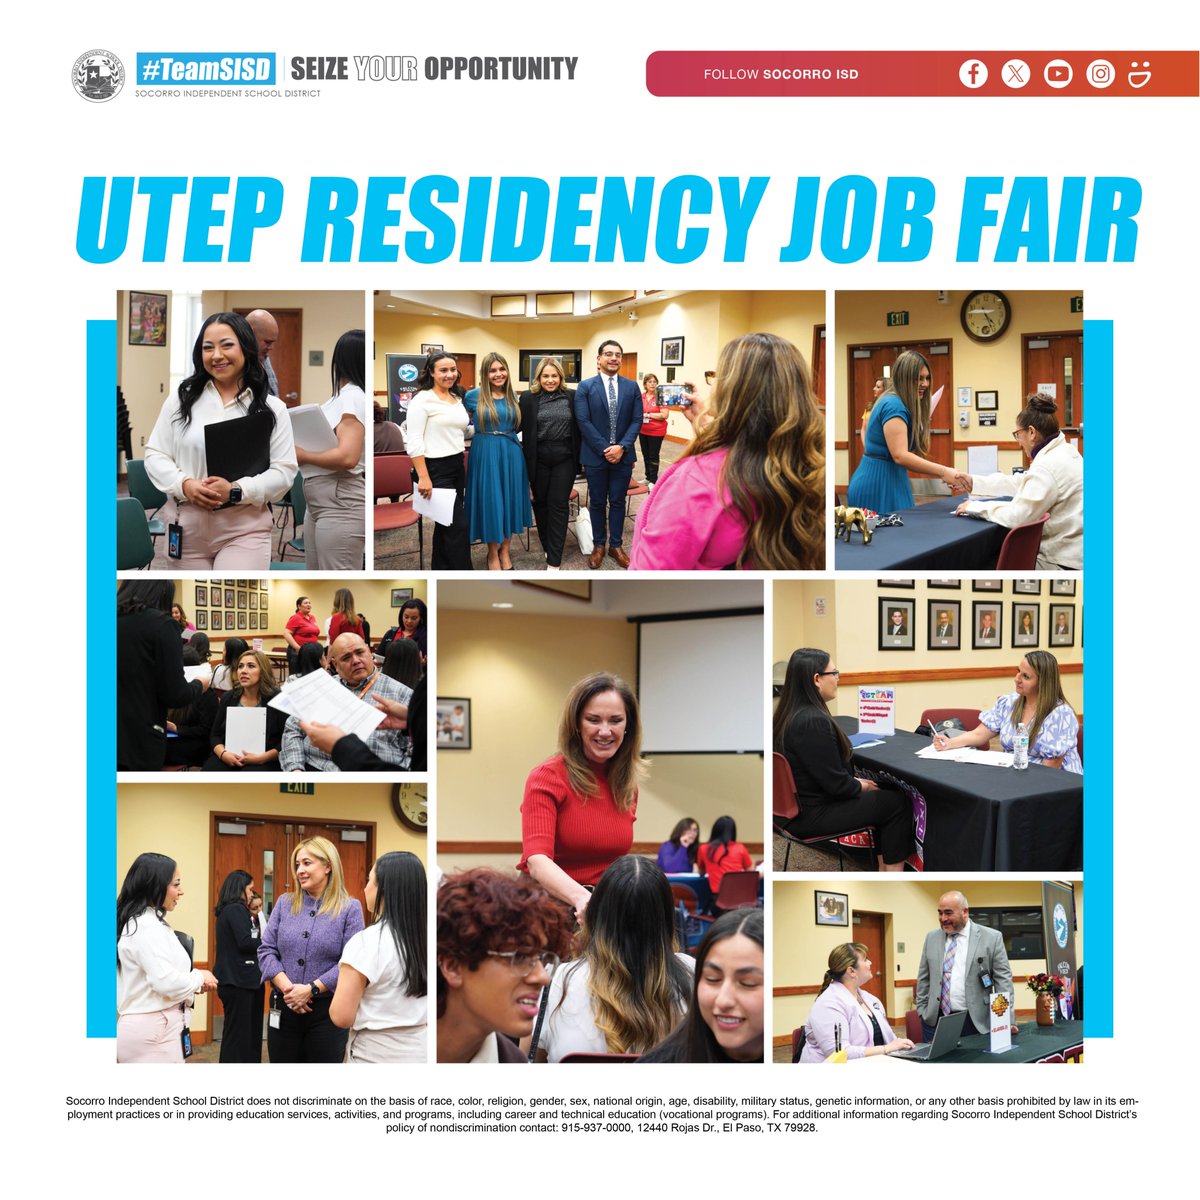 From residency to employment, we are celebrating our @UTEP partnership where talented teachers found their new home at #TeamISD through our UTEP Residency Job Fair.🥳🧑‍🏫🍎👏 #SeizeYourOpportunity